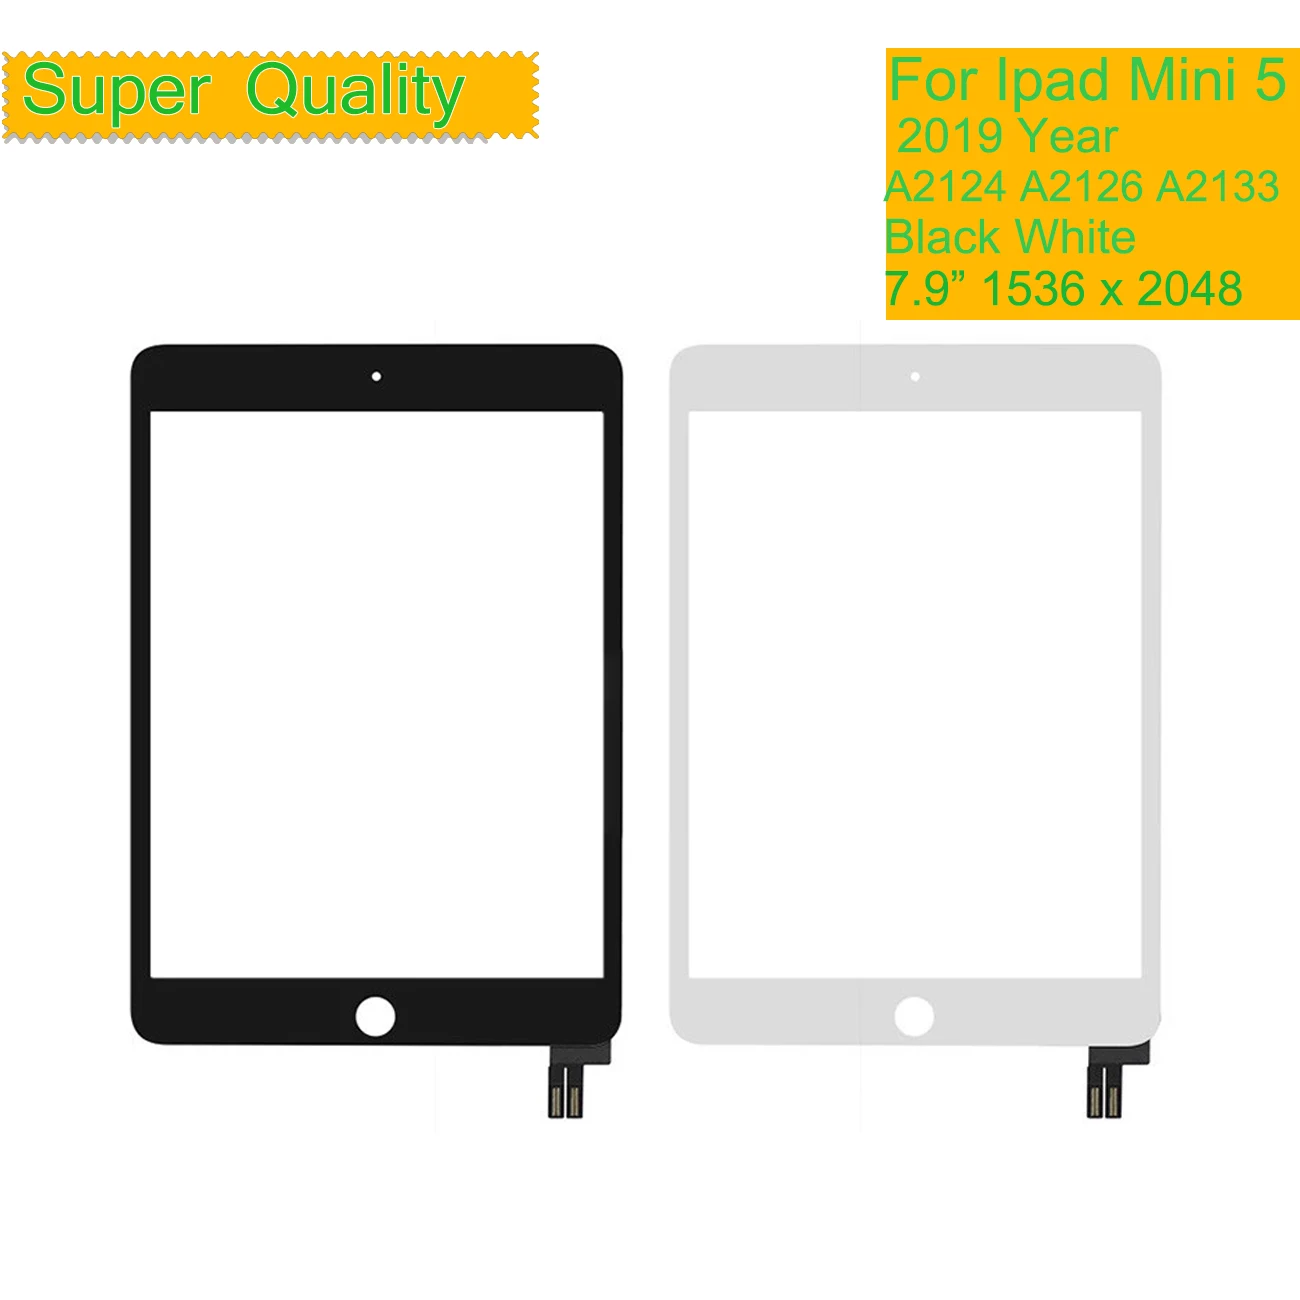 10Pcs/Lot For Apple iPad Mini 5 Touch Screen Digitizer Panel For iPad Mini 5 2019 A2124 A2126 A2133 LCD Front Outer Glass Sensor 10pcs for xiaomi mi9 mi 9 se lcd outer touch screen cover panel front glass lens repair replacement part